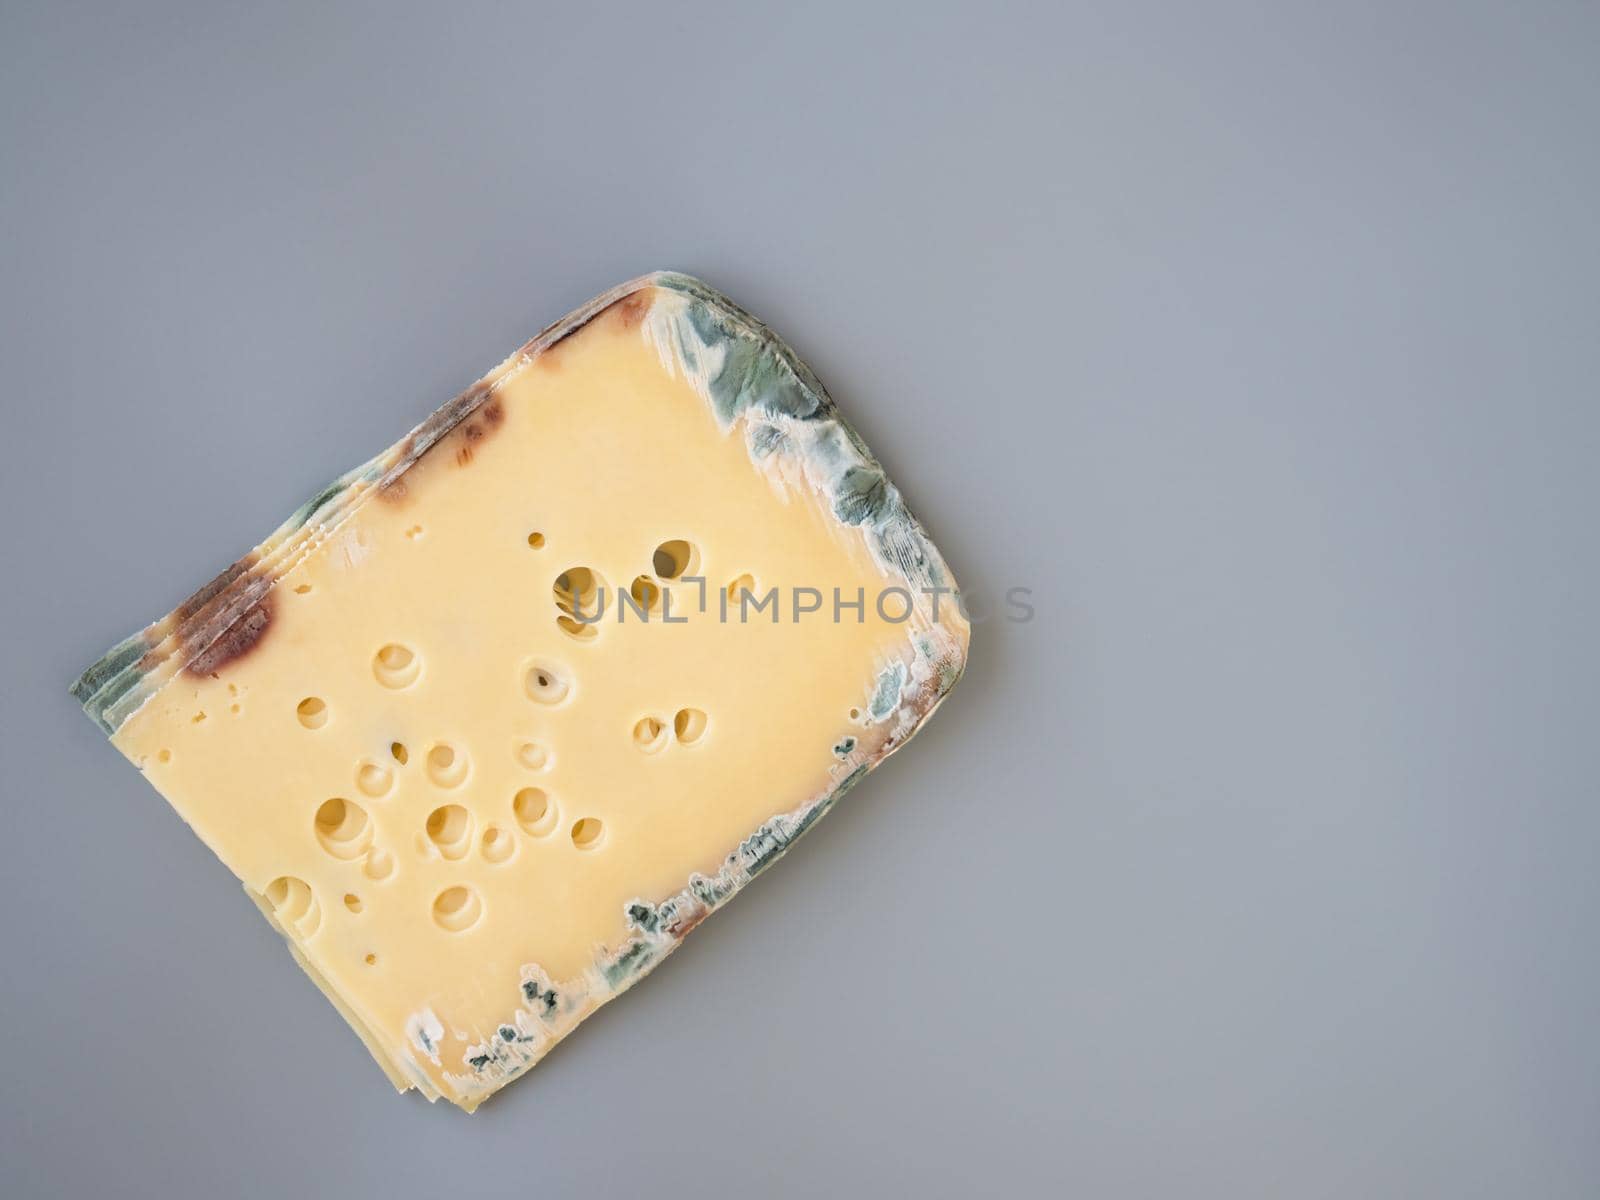 Expired moldy hard cheese purchased at the supermarket. Wastage of Lycopersicon. Incorrect long-term storage. Food waste in supermarkets. Rotten meal on the grey background. Copy space